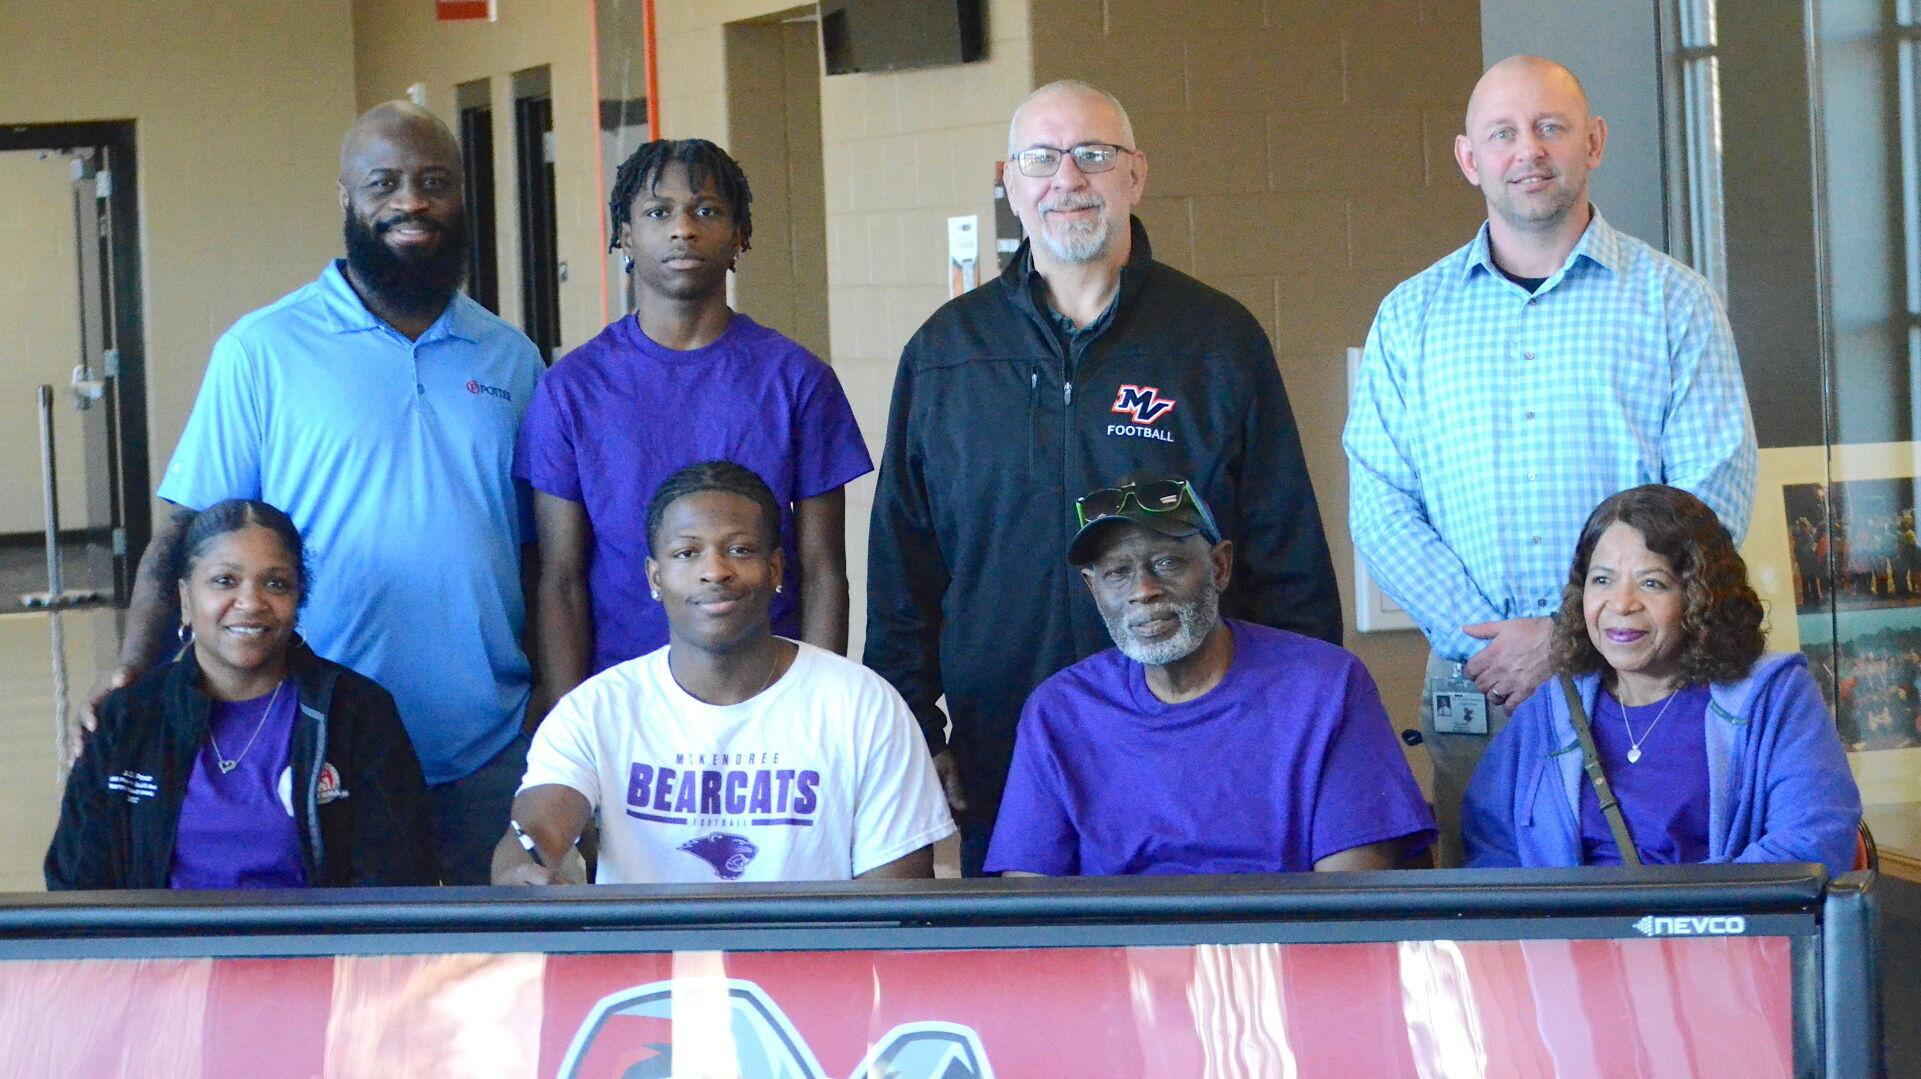 Preparing for the future: Mylan Nettles continues his student-athlete lifestyle at McKendree